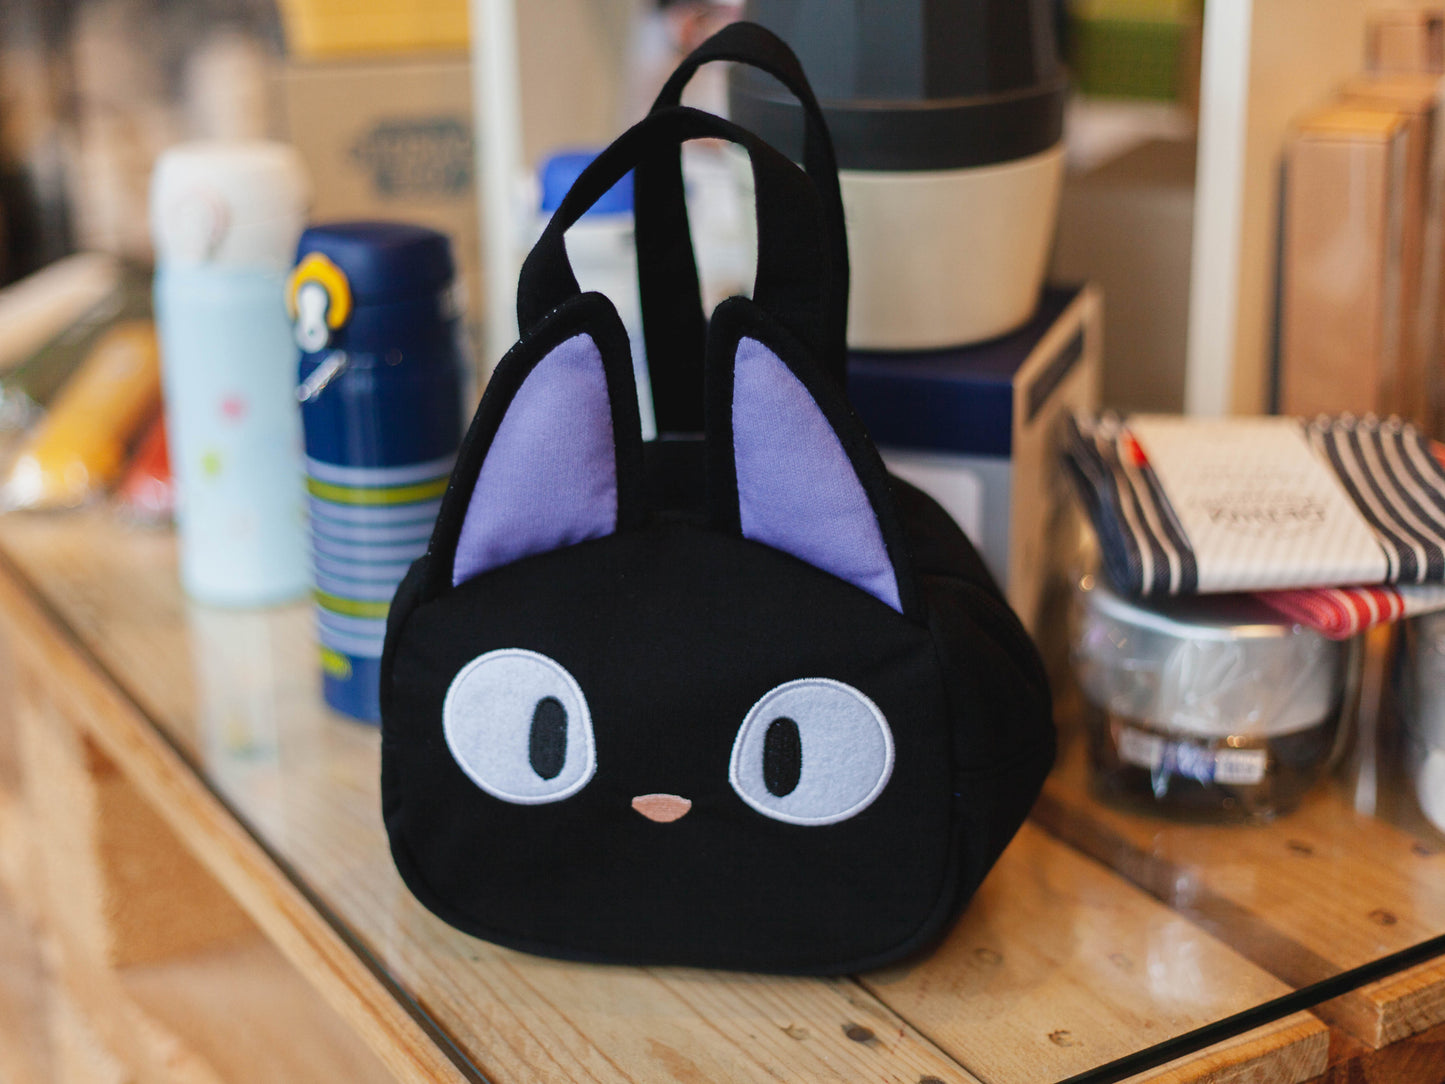 Jiji Die-Cut Lunch Bag by Skater - Bento&co Japanese Bento Lunch Boxes and Kitchenware Specialists